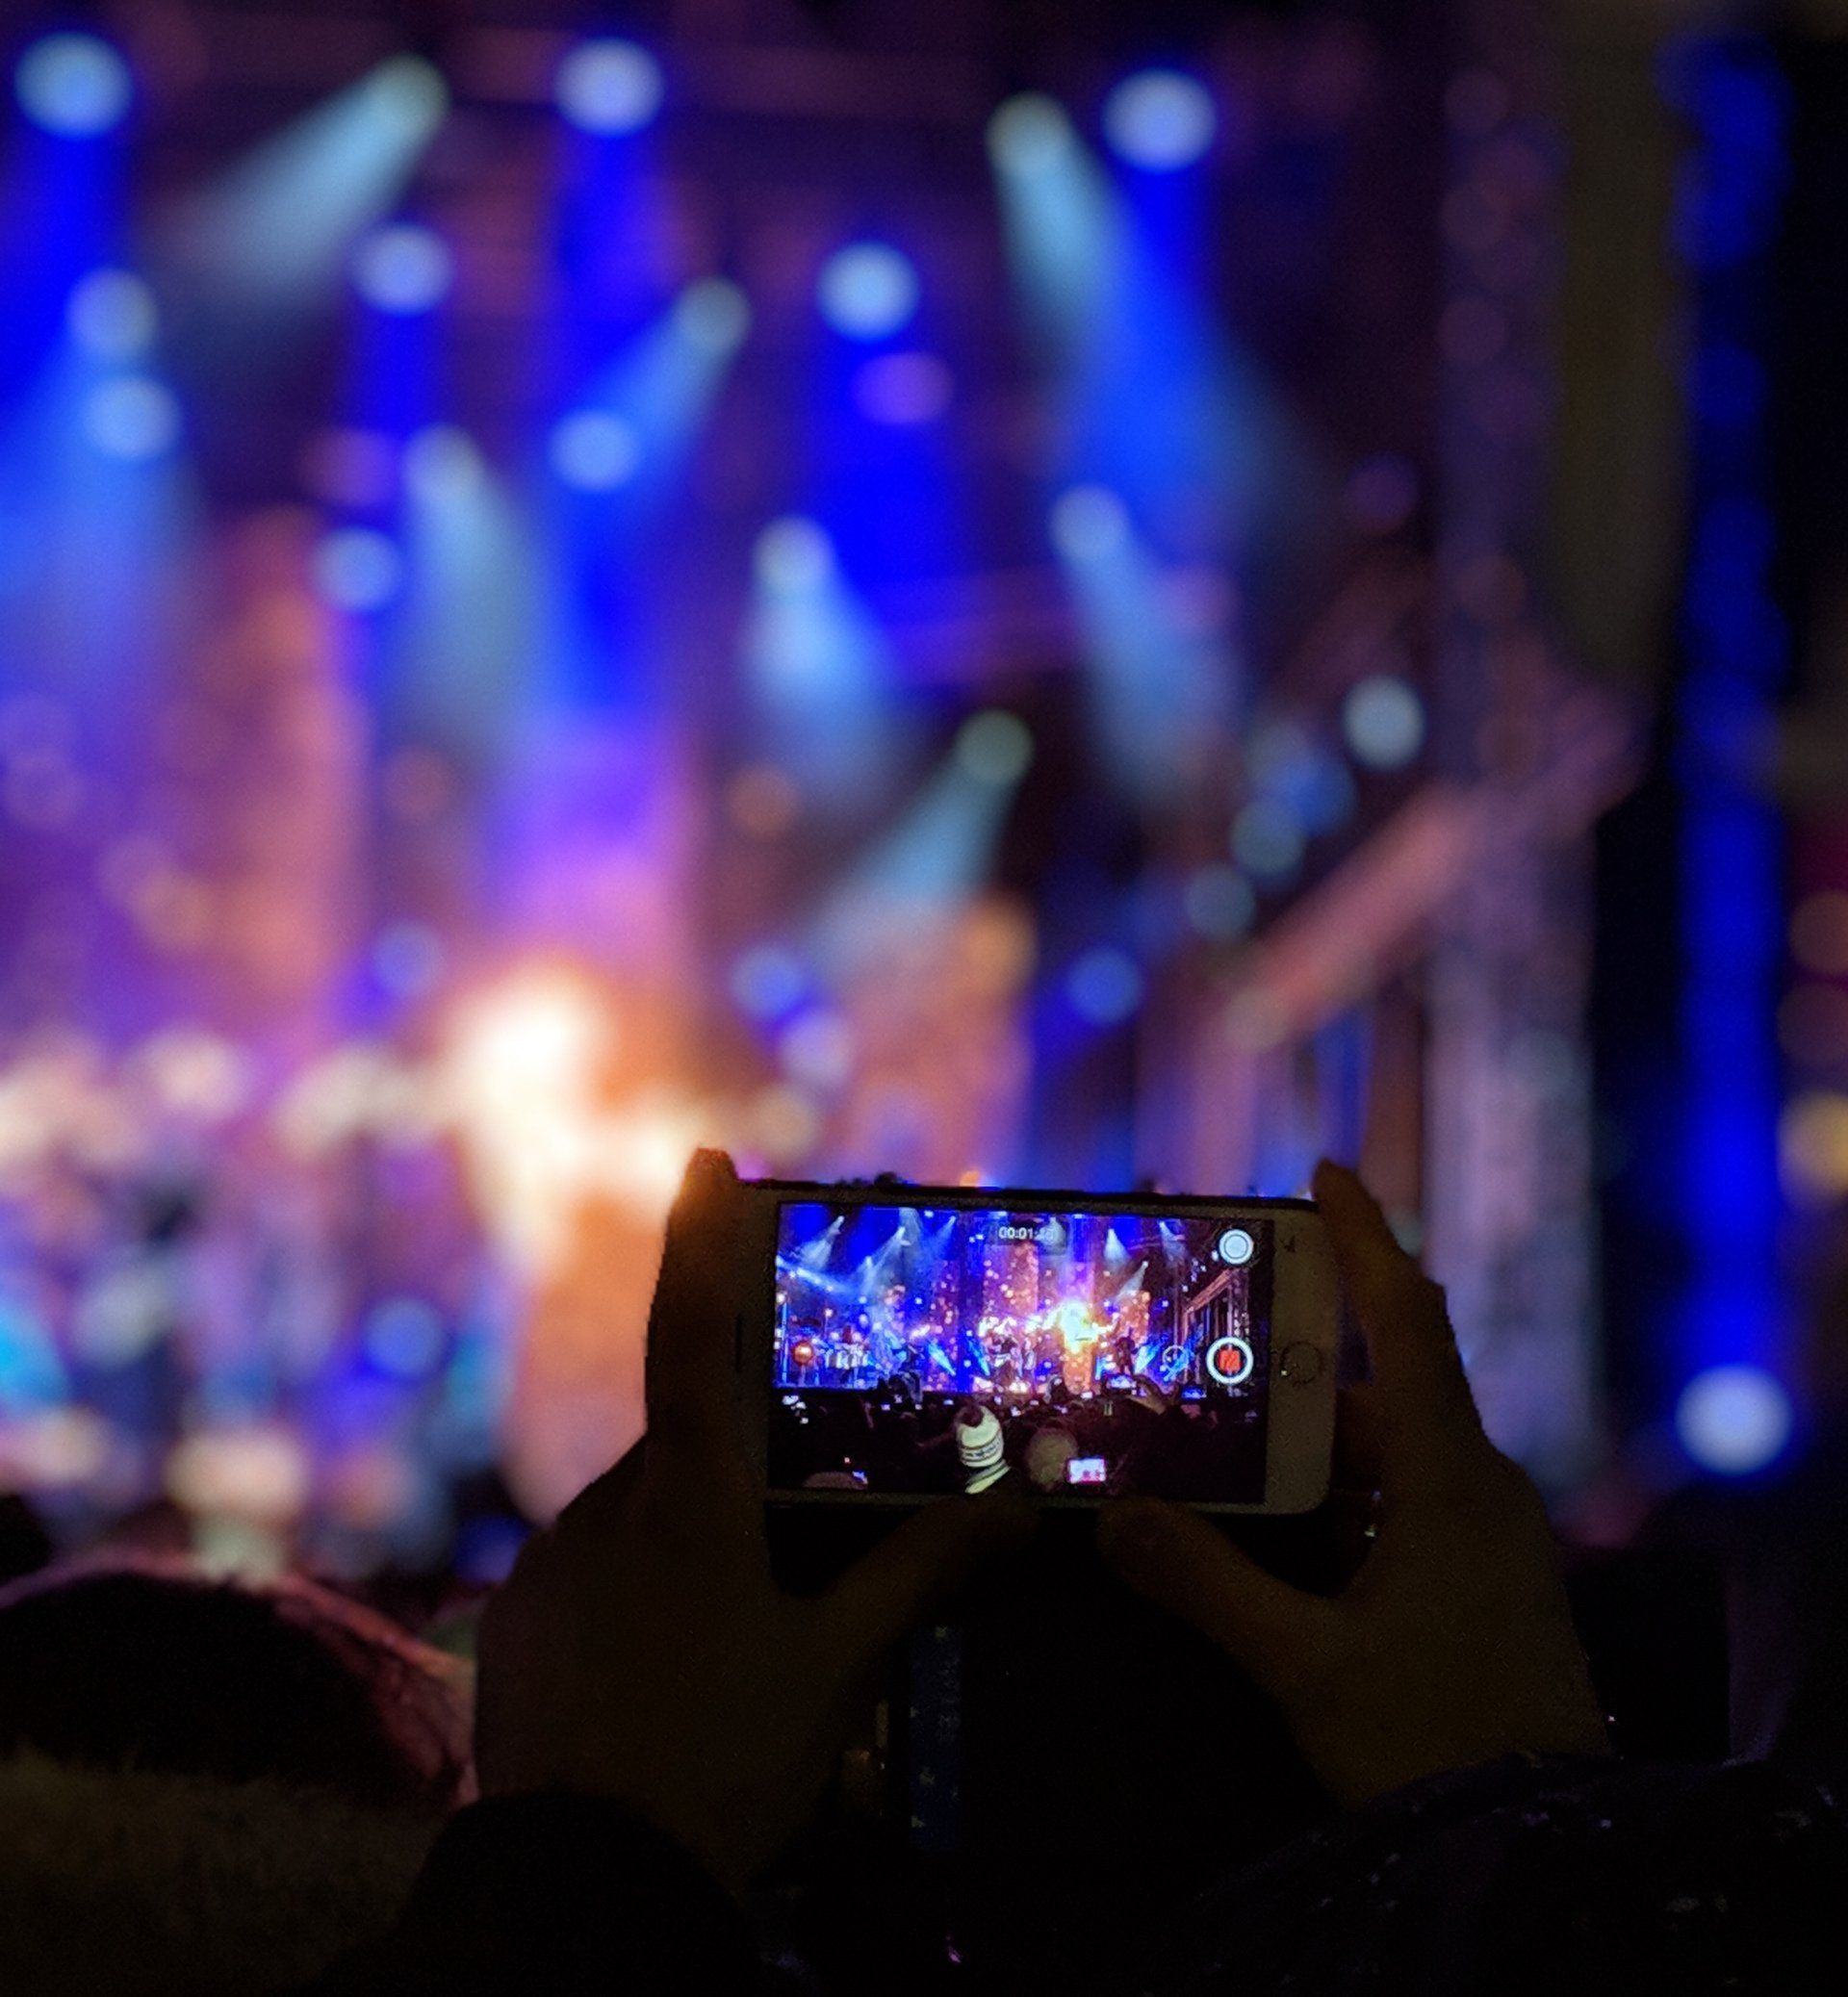 A person is taking a picture of a concert with a cell phone